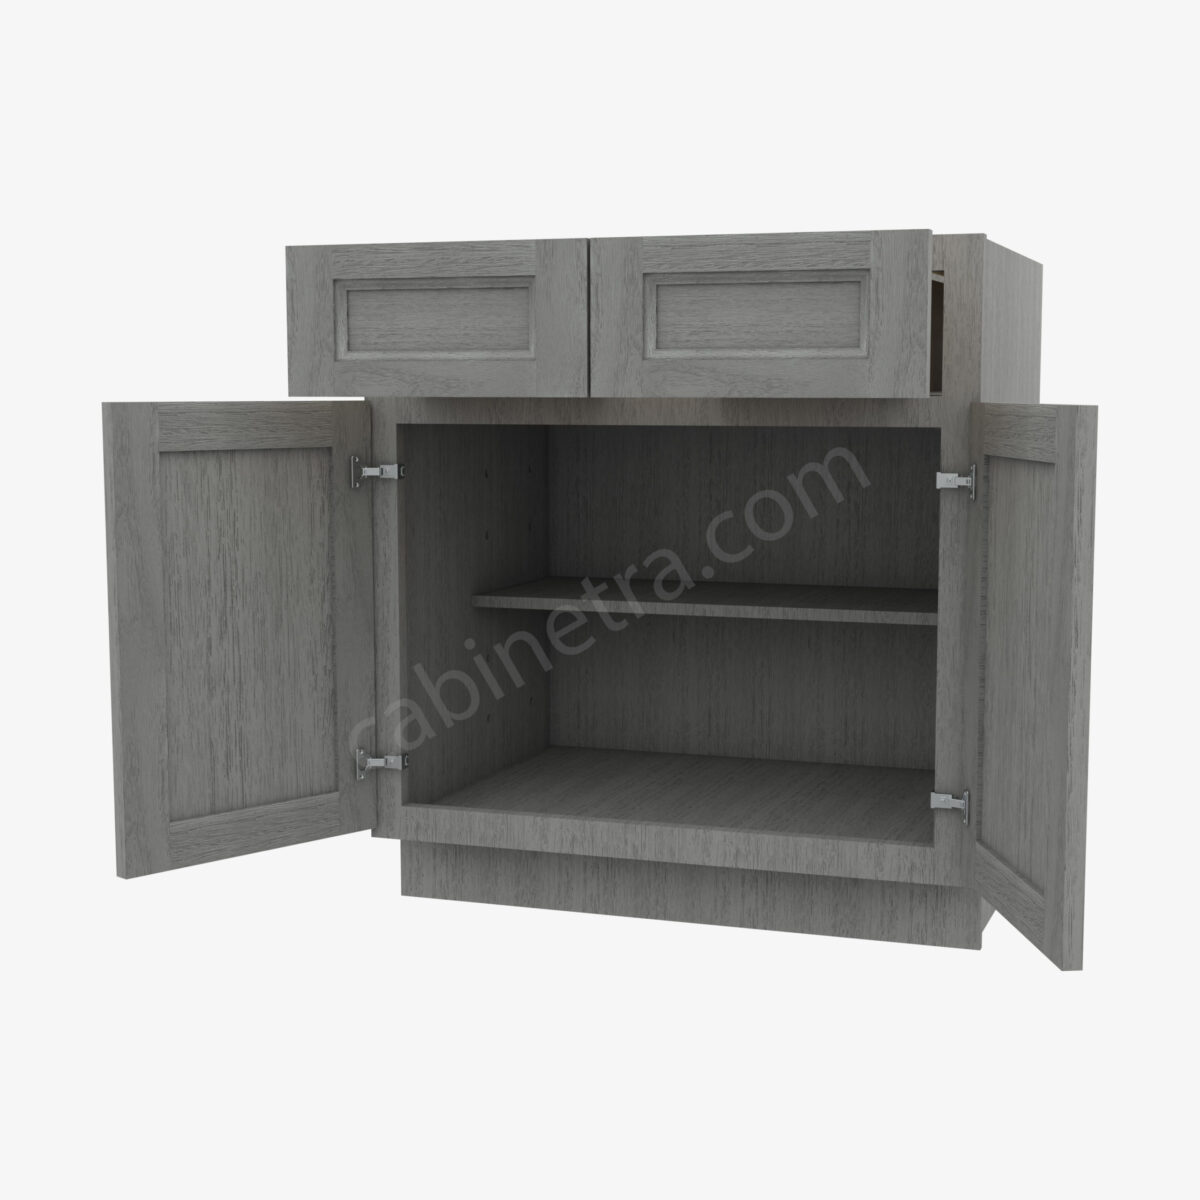 TG B30B 5 Forevermark Midtown Grey Cabinetra scaled